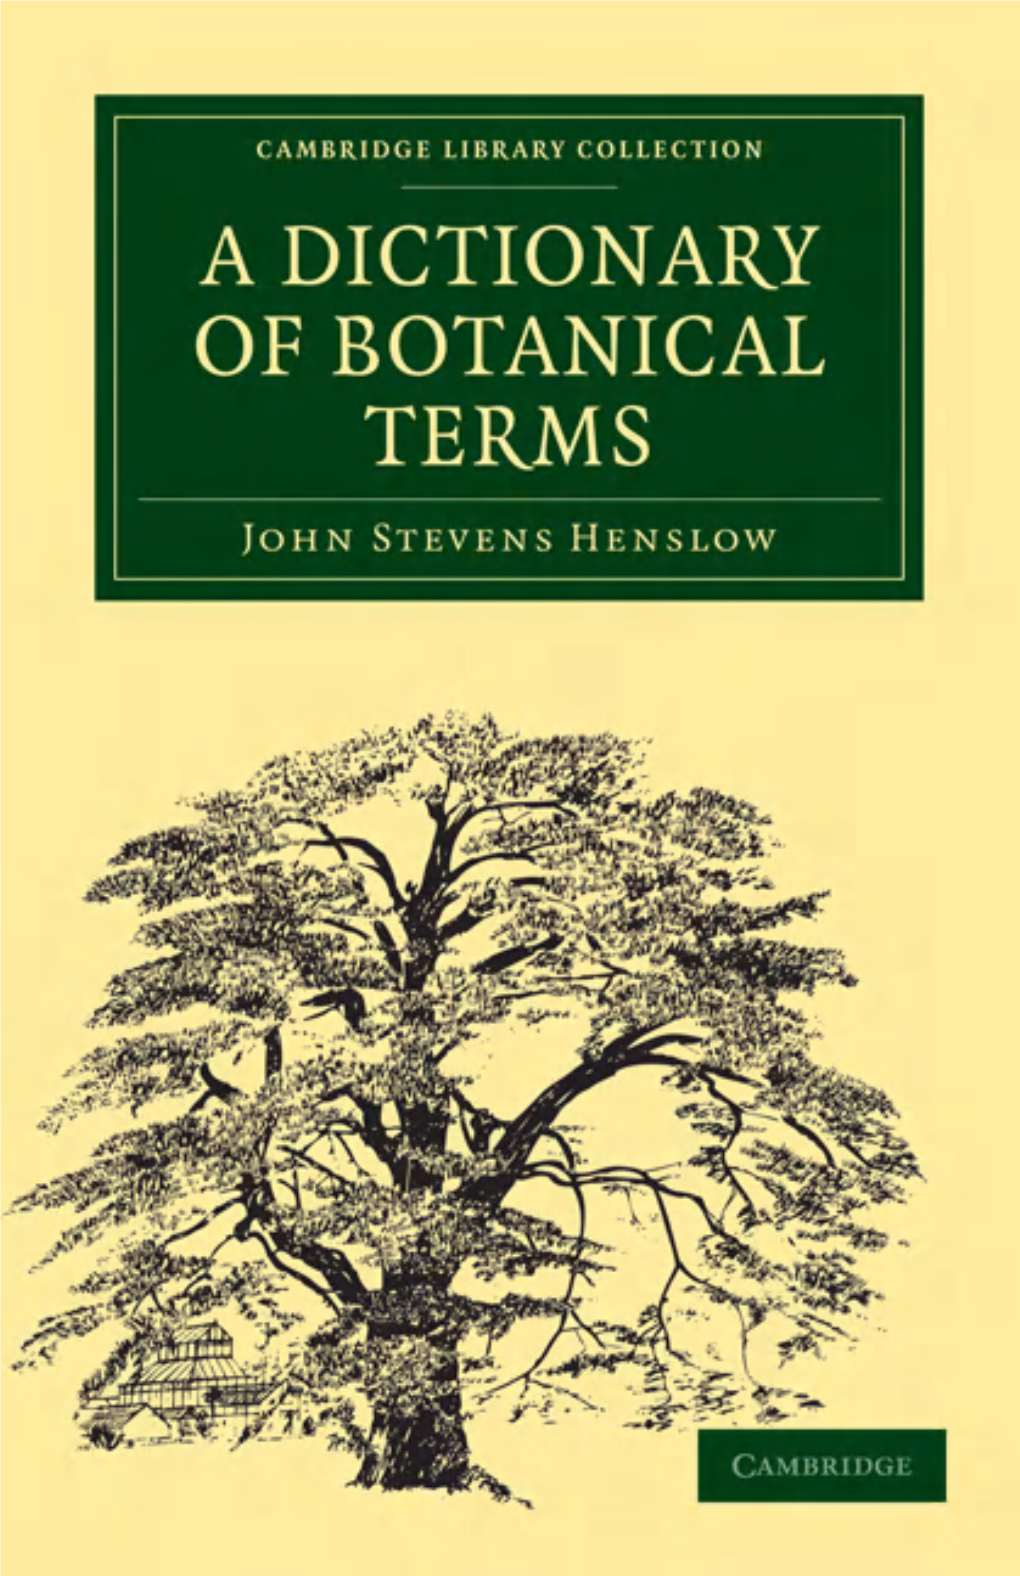 A Dictionary of Botanical Terms John Stevens Henslow (1796 – 1861) Was a Botanist and Geologist